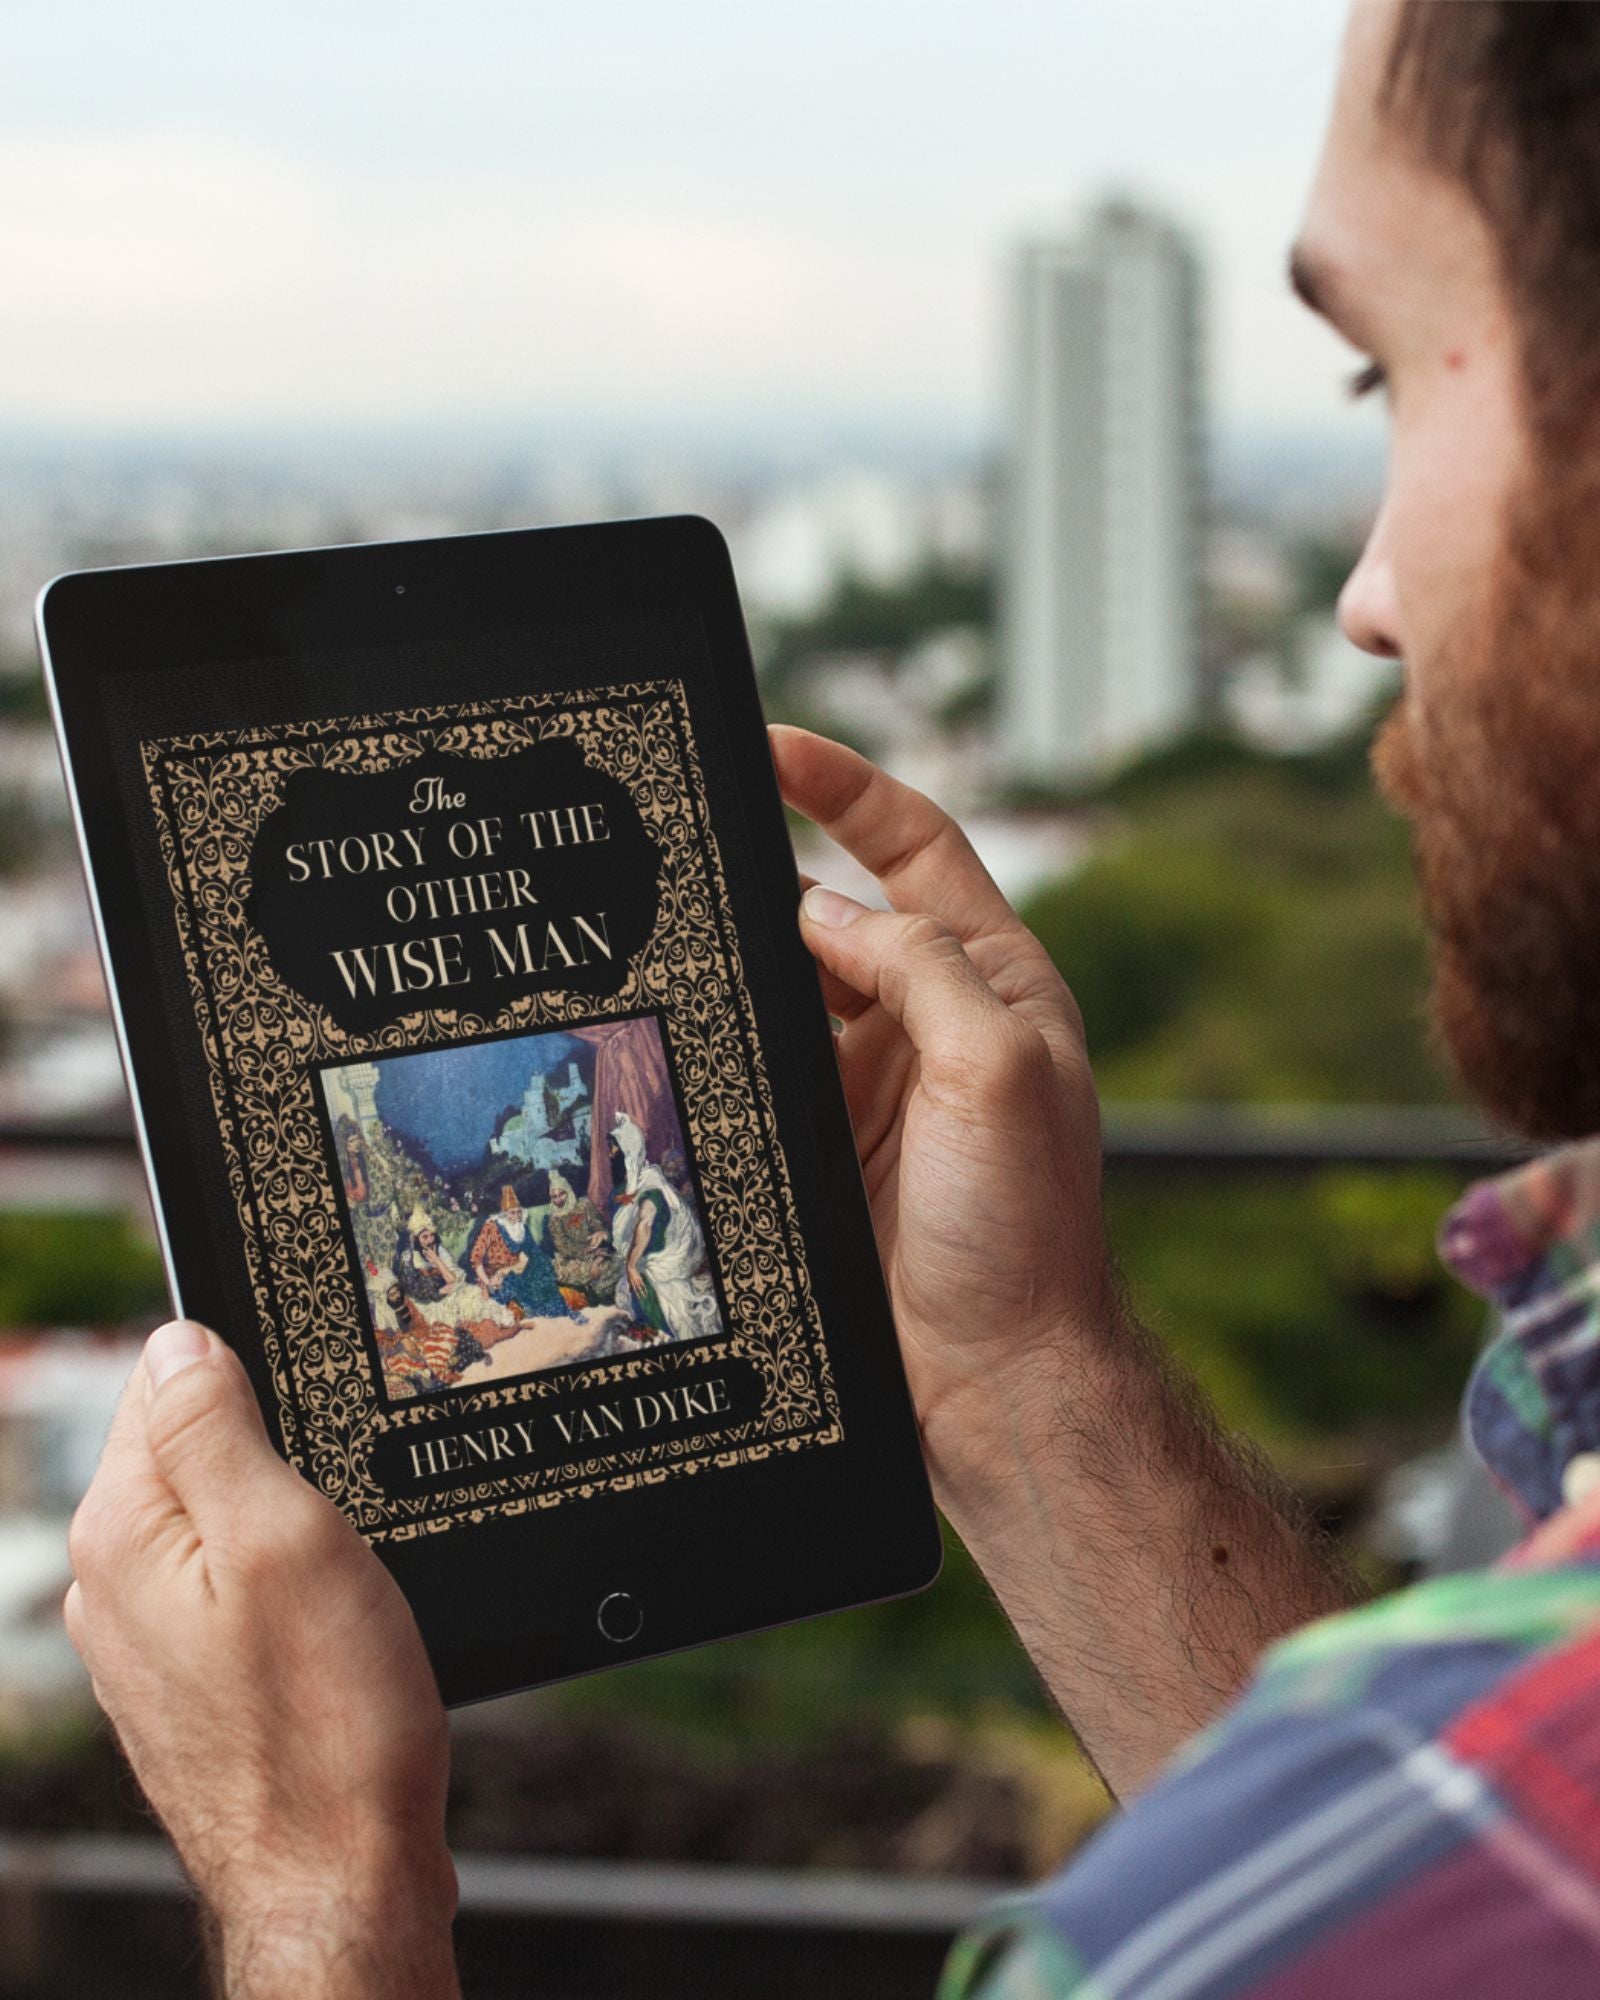 Bearded white man holding a black tablet on a balcony with buildings blurred in the background. On the tablet is the black and gold ornate cover of "The Story of the Other Wise Man".